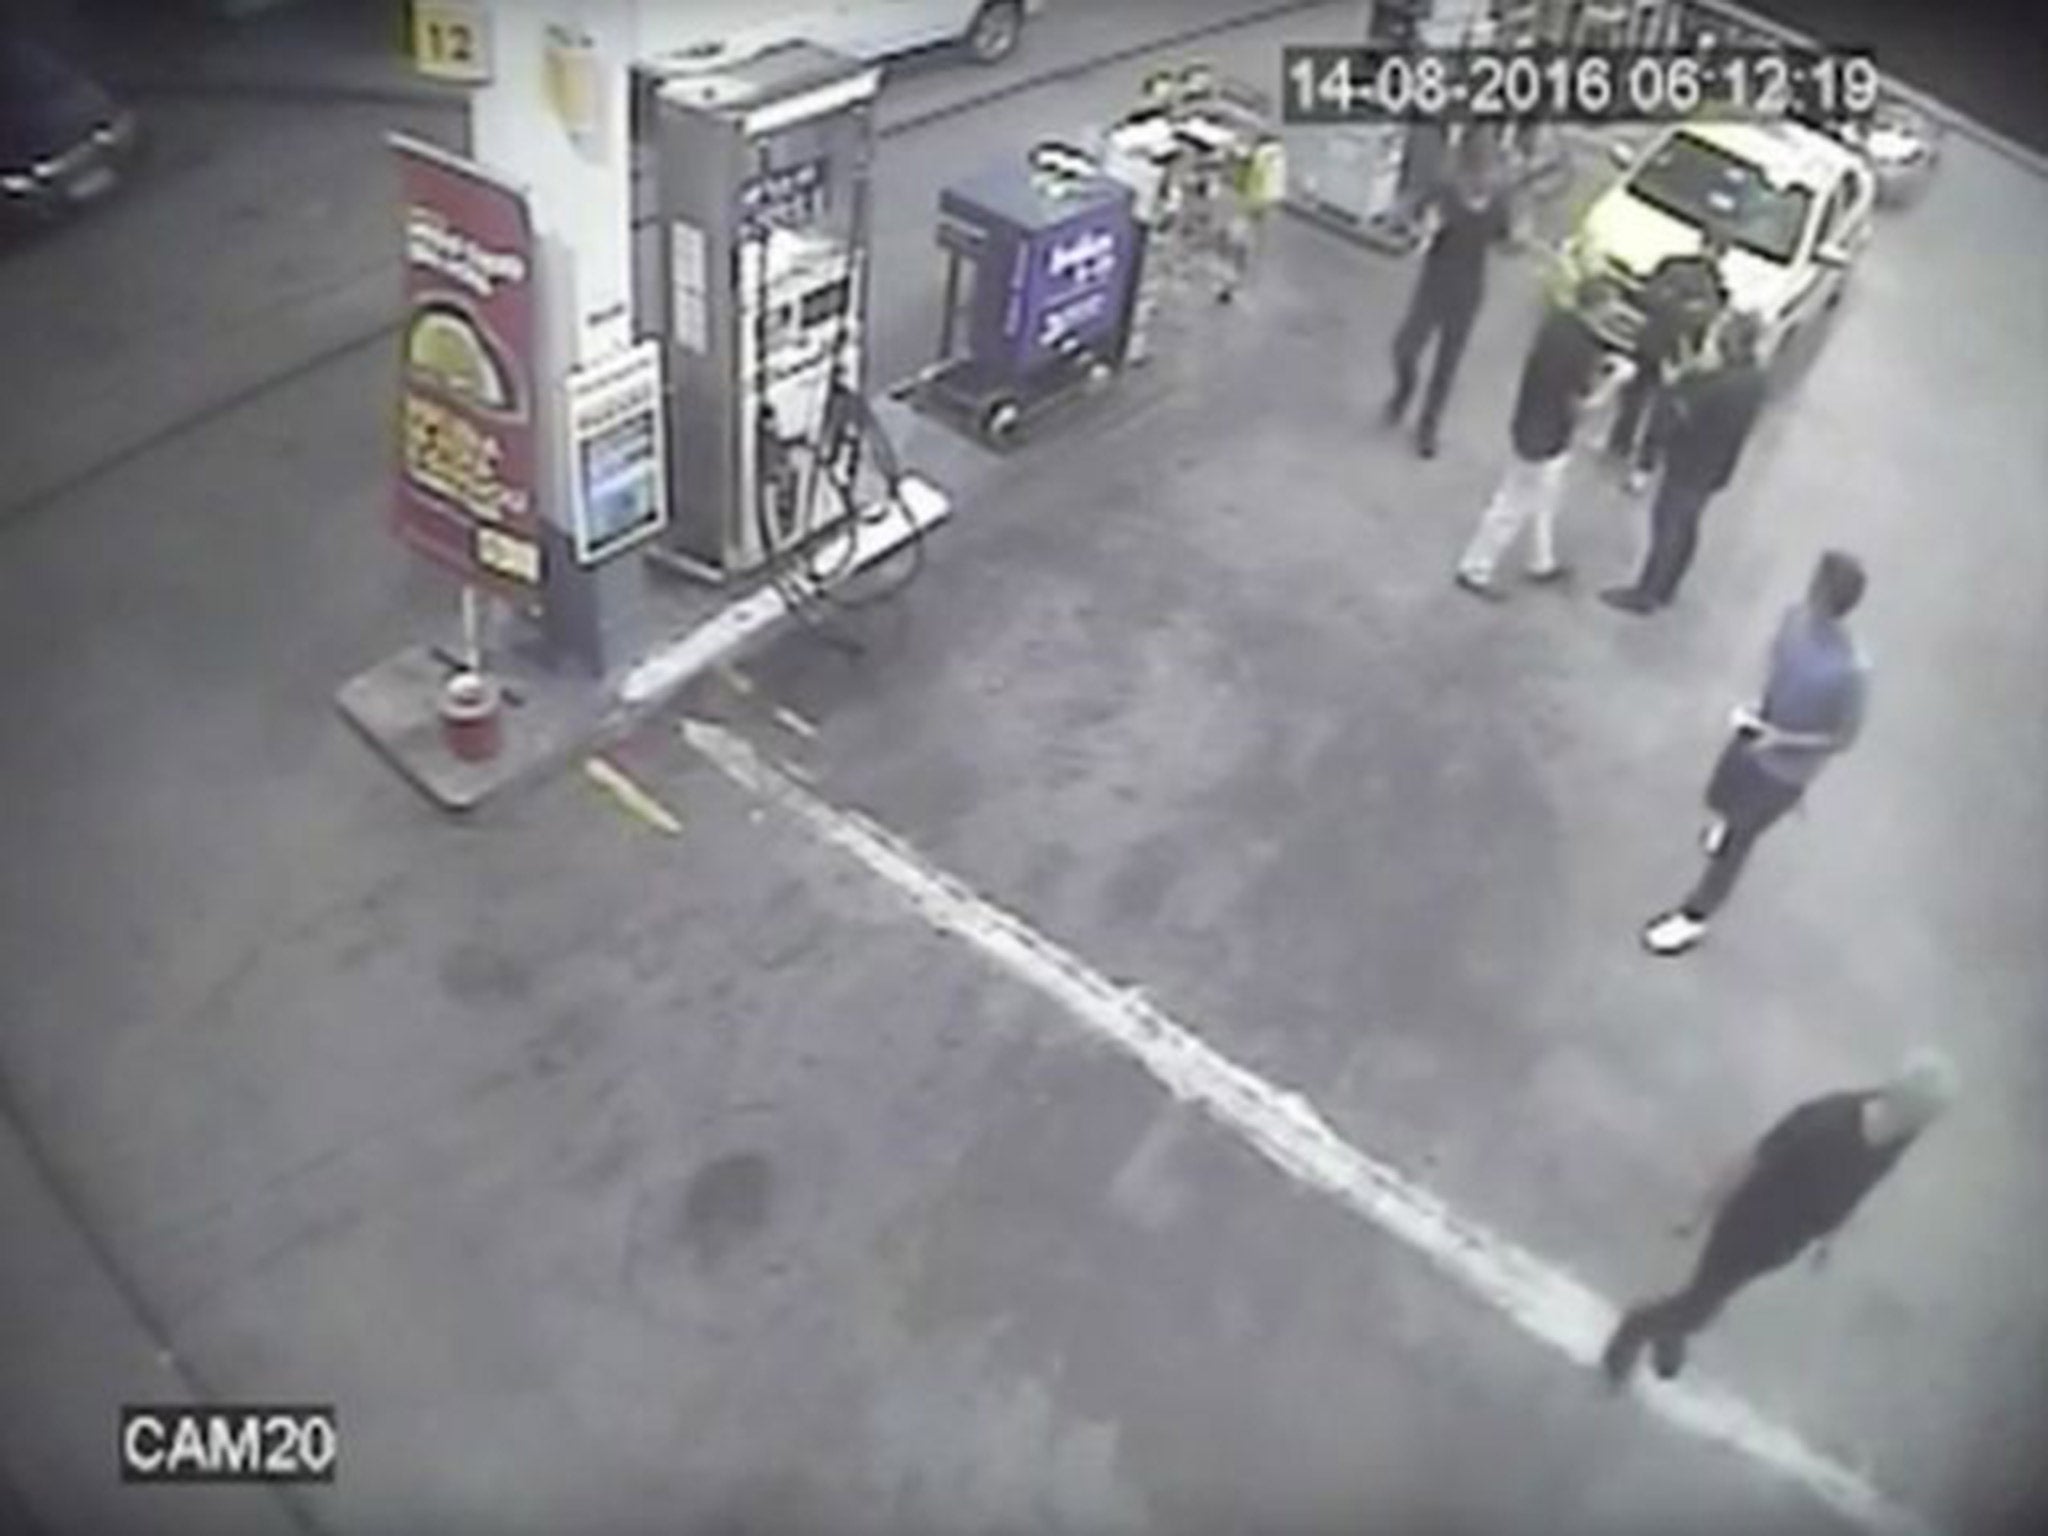 Lochte, Bentz, Conger and Feigen are captured by CCTV at the petrol station